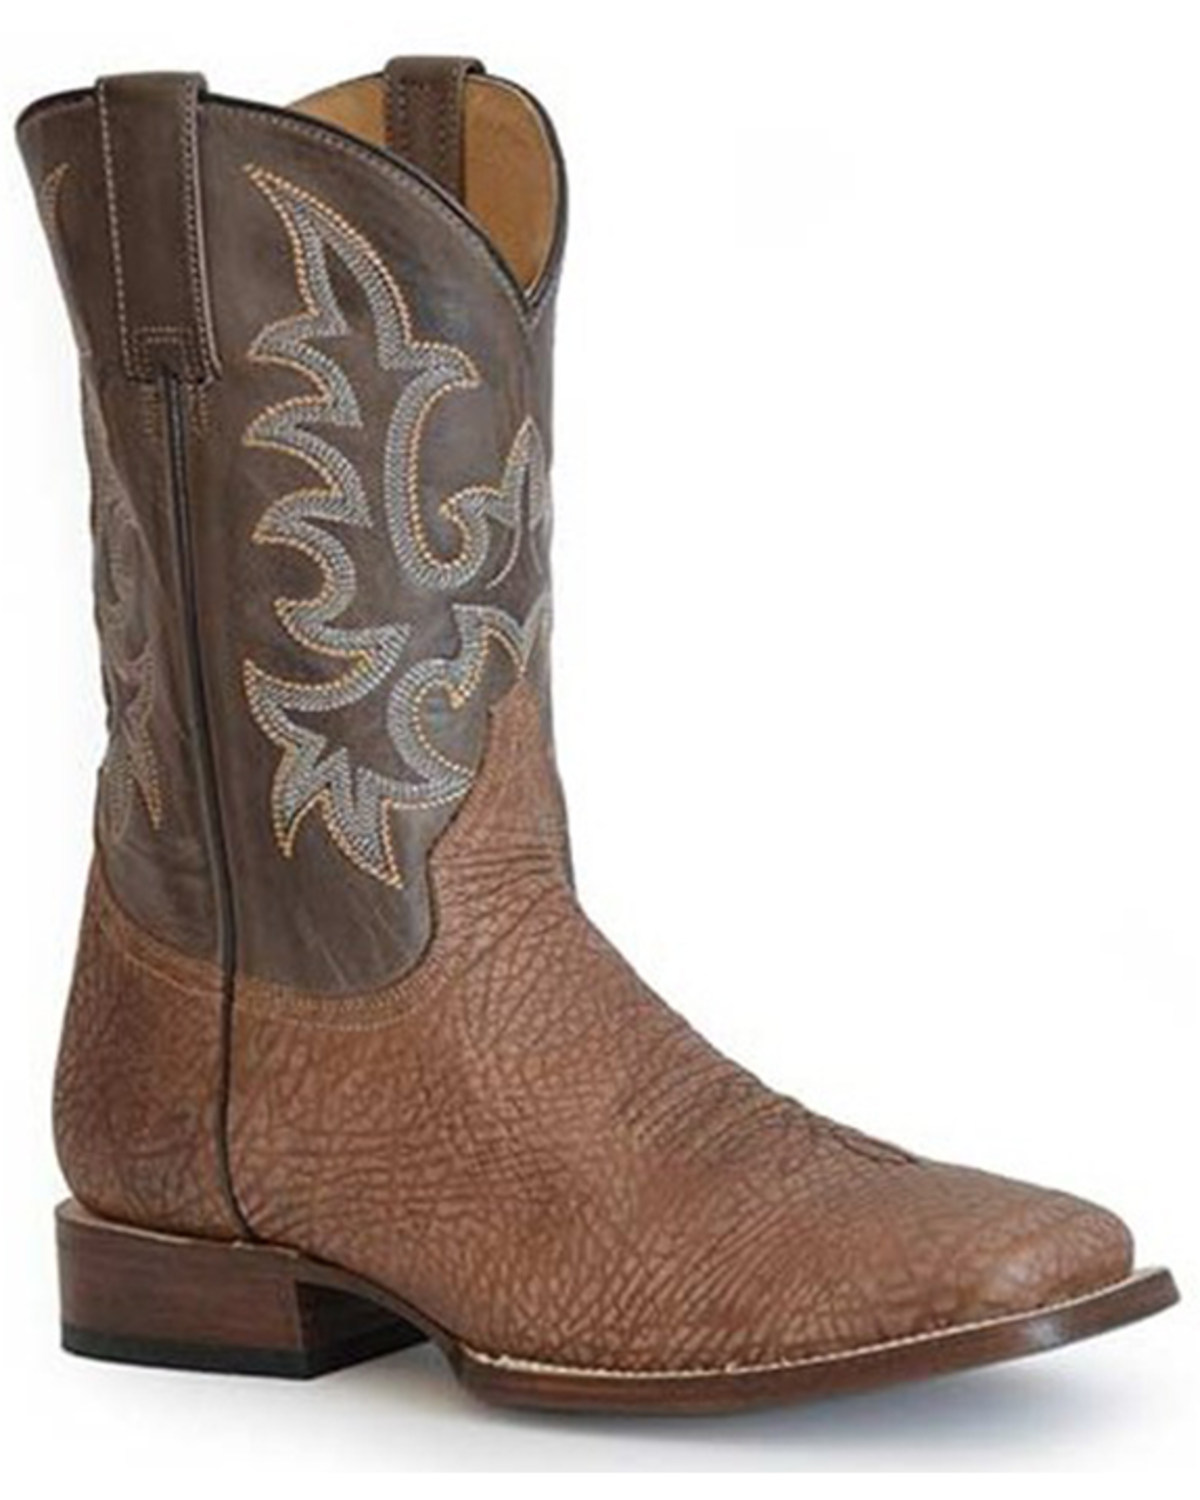 Stetson Men's Obadiah Oiled Bison Western Boots